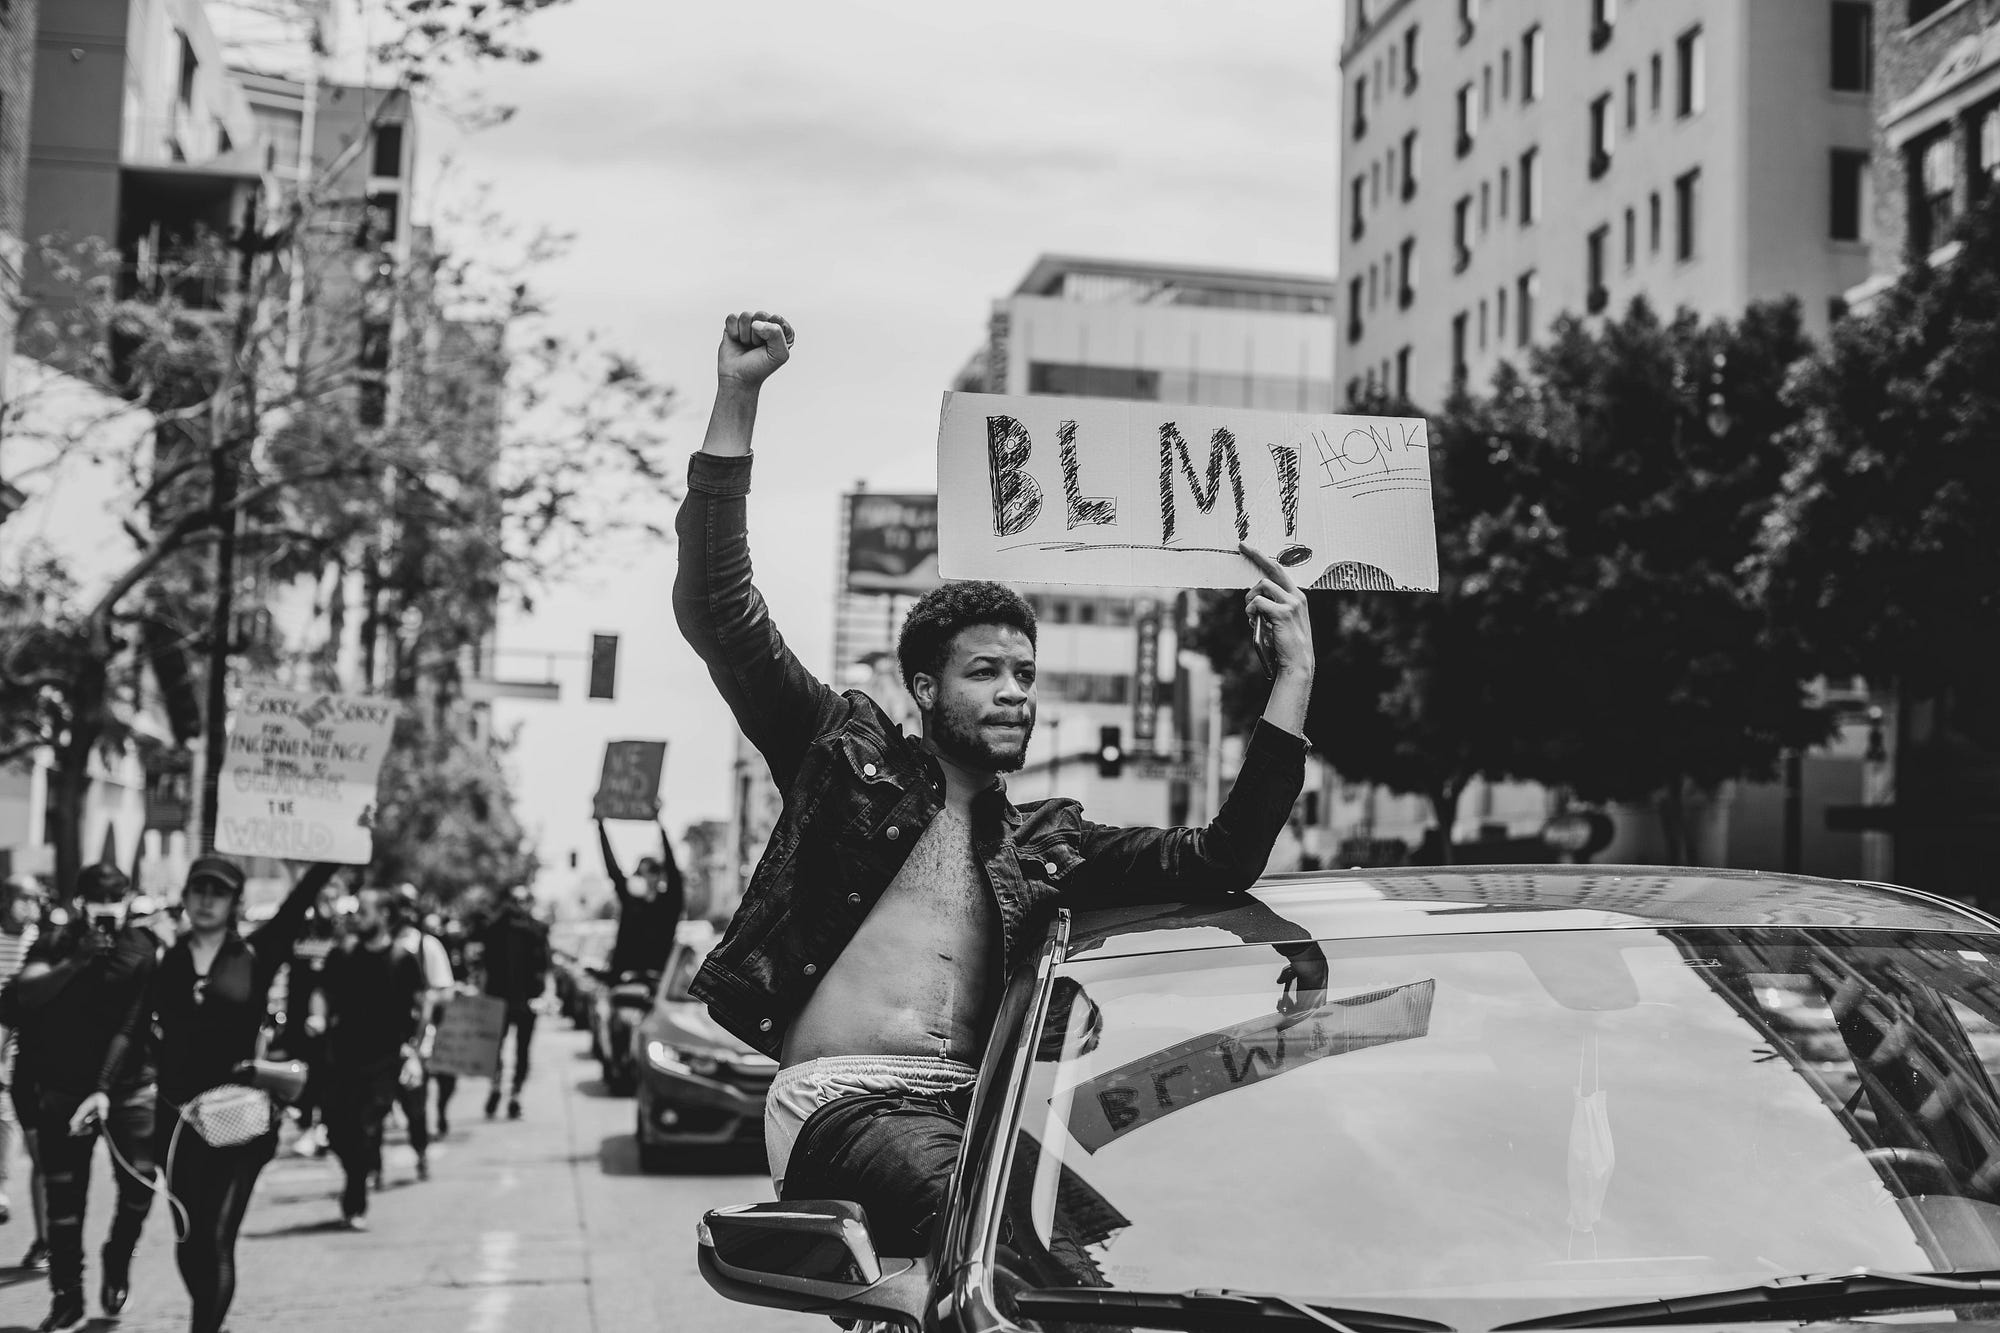 A Black man sitting in a car window holding up a fist and a Black Lives Matter sign.